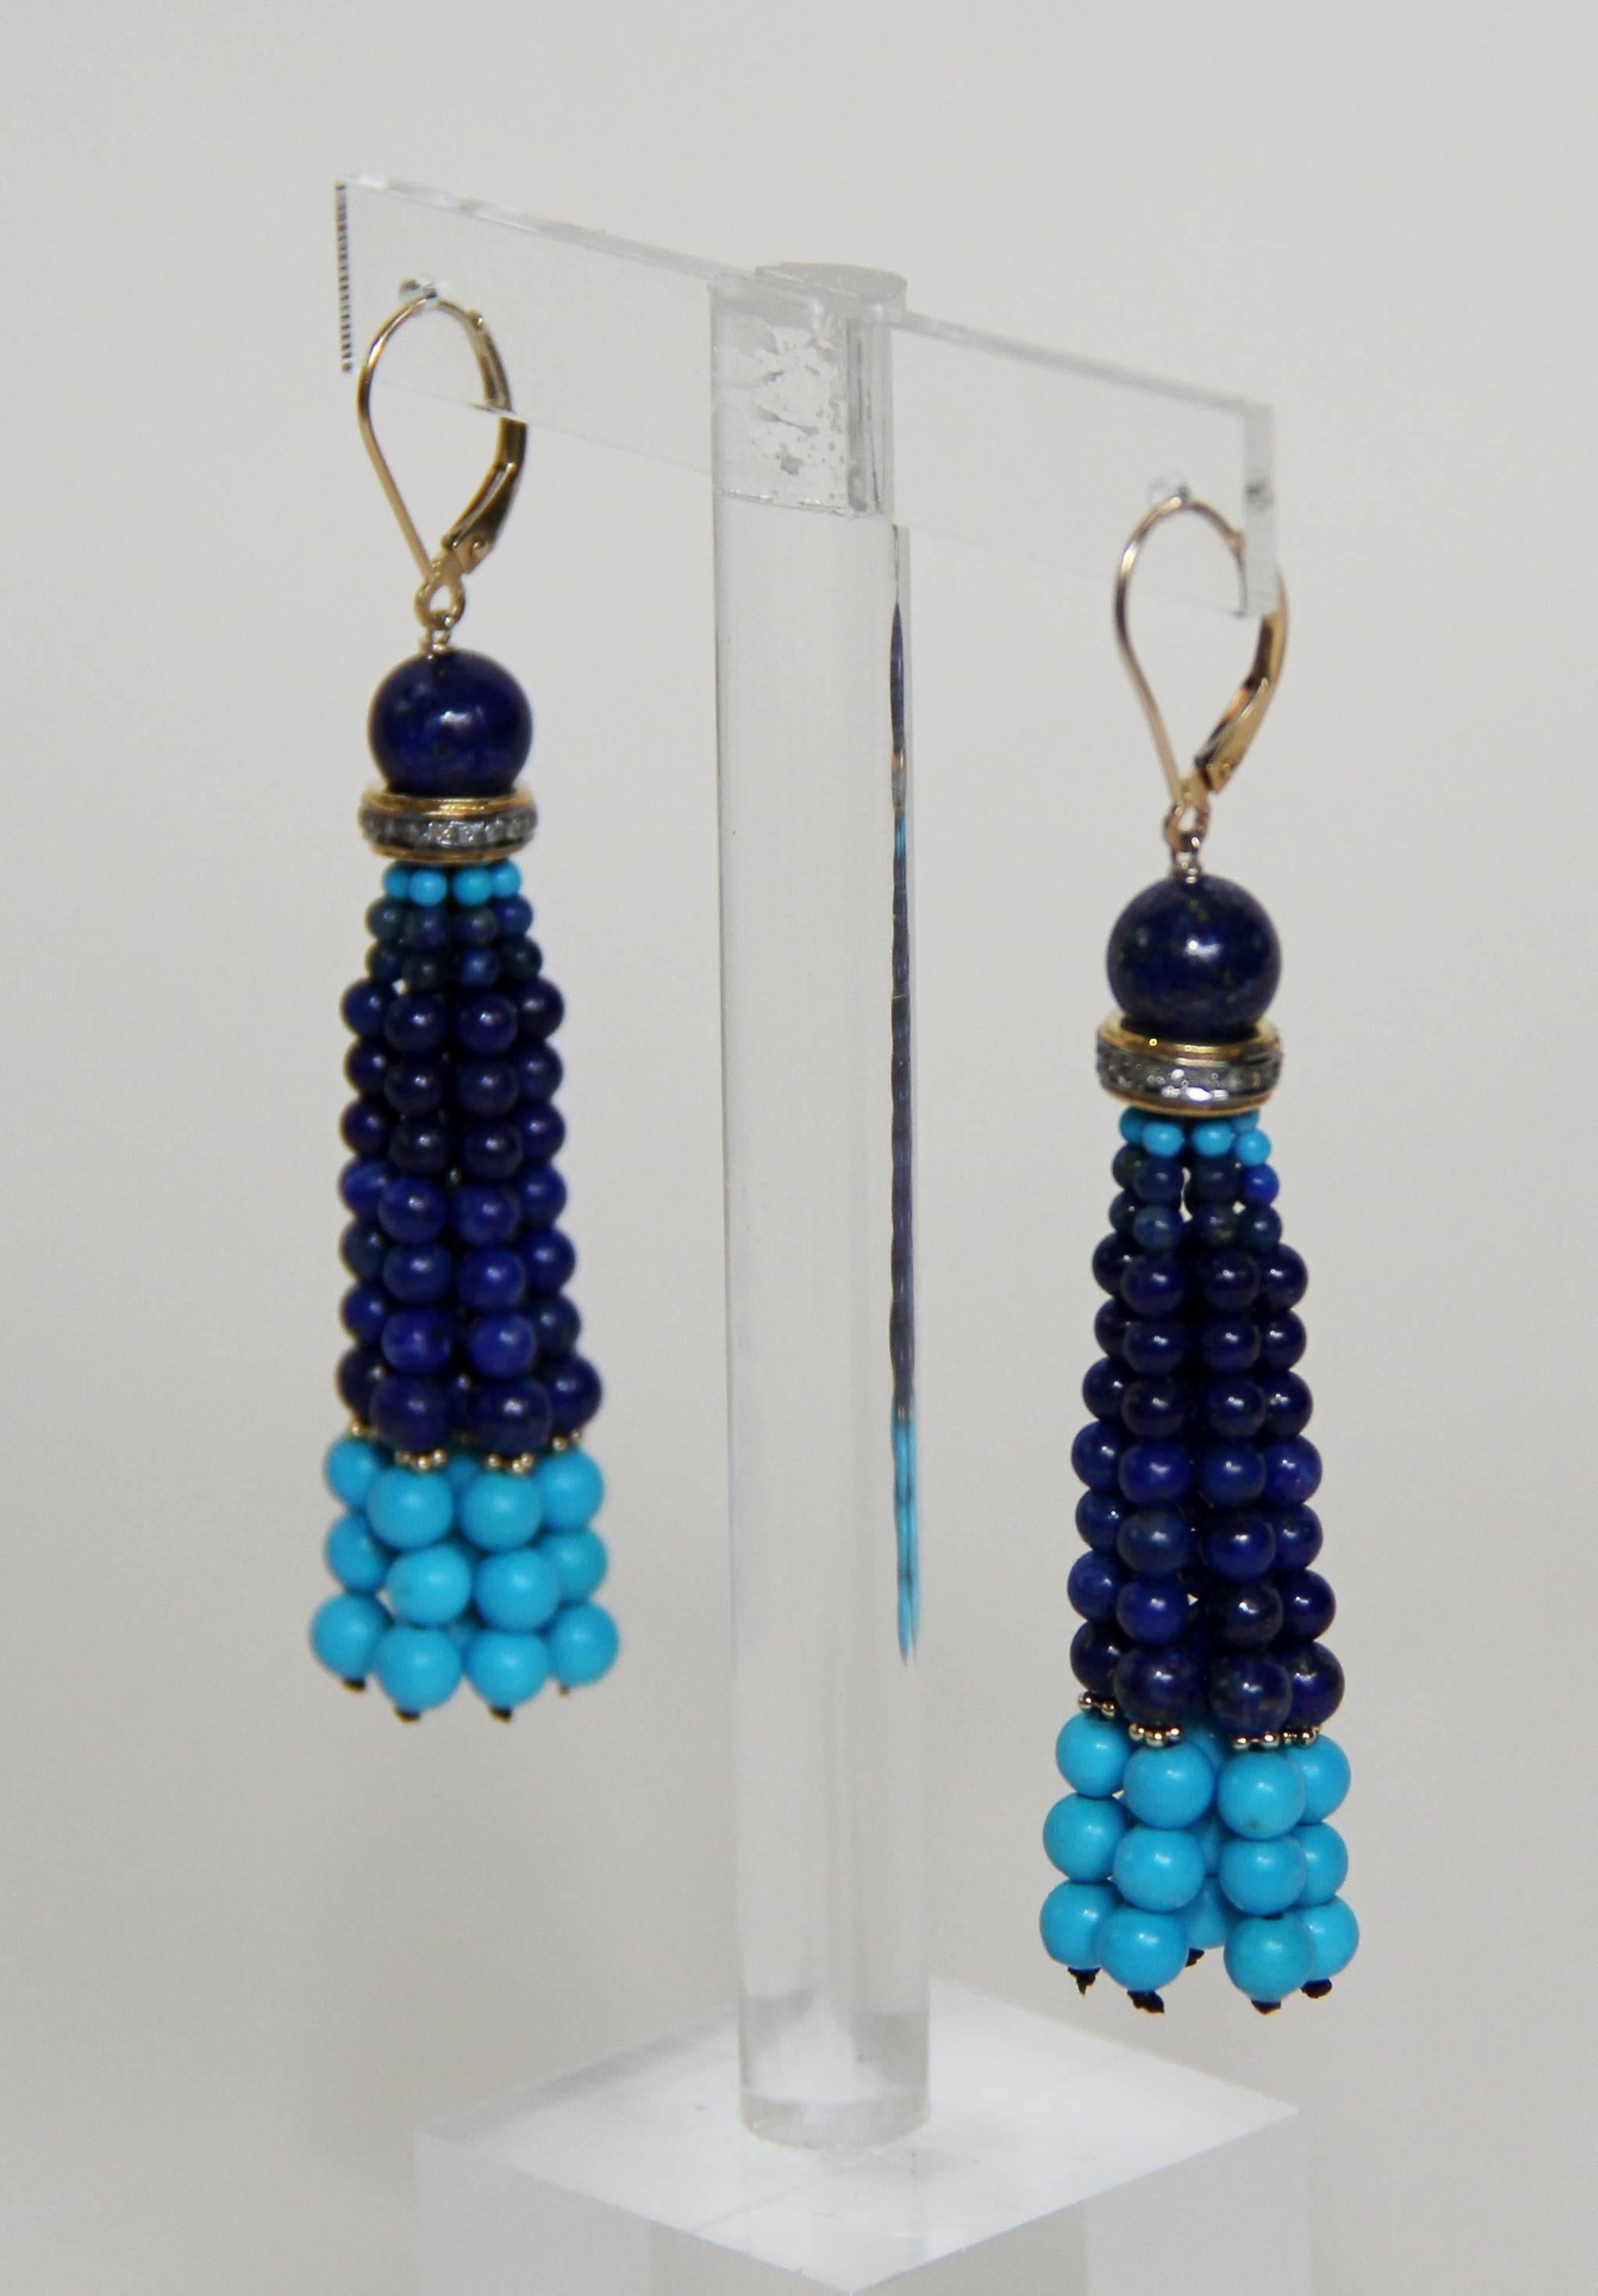  Multi-strand tassel earrings with small, fine, turquoise beads. Tassels suspended from 6mm Lapis Lazuli bead by a silver gold plated rondelle with diamonds. 14k yellow gold beads highlight contrast between 3 mm turquoise beads and 2.5 mm lapis